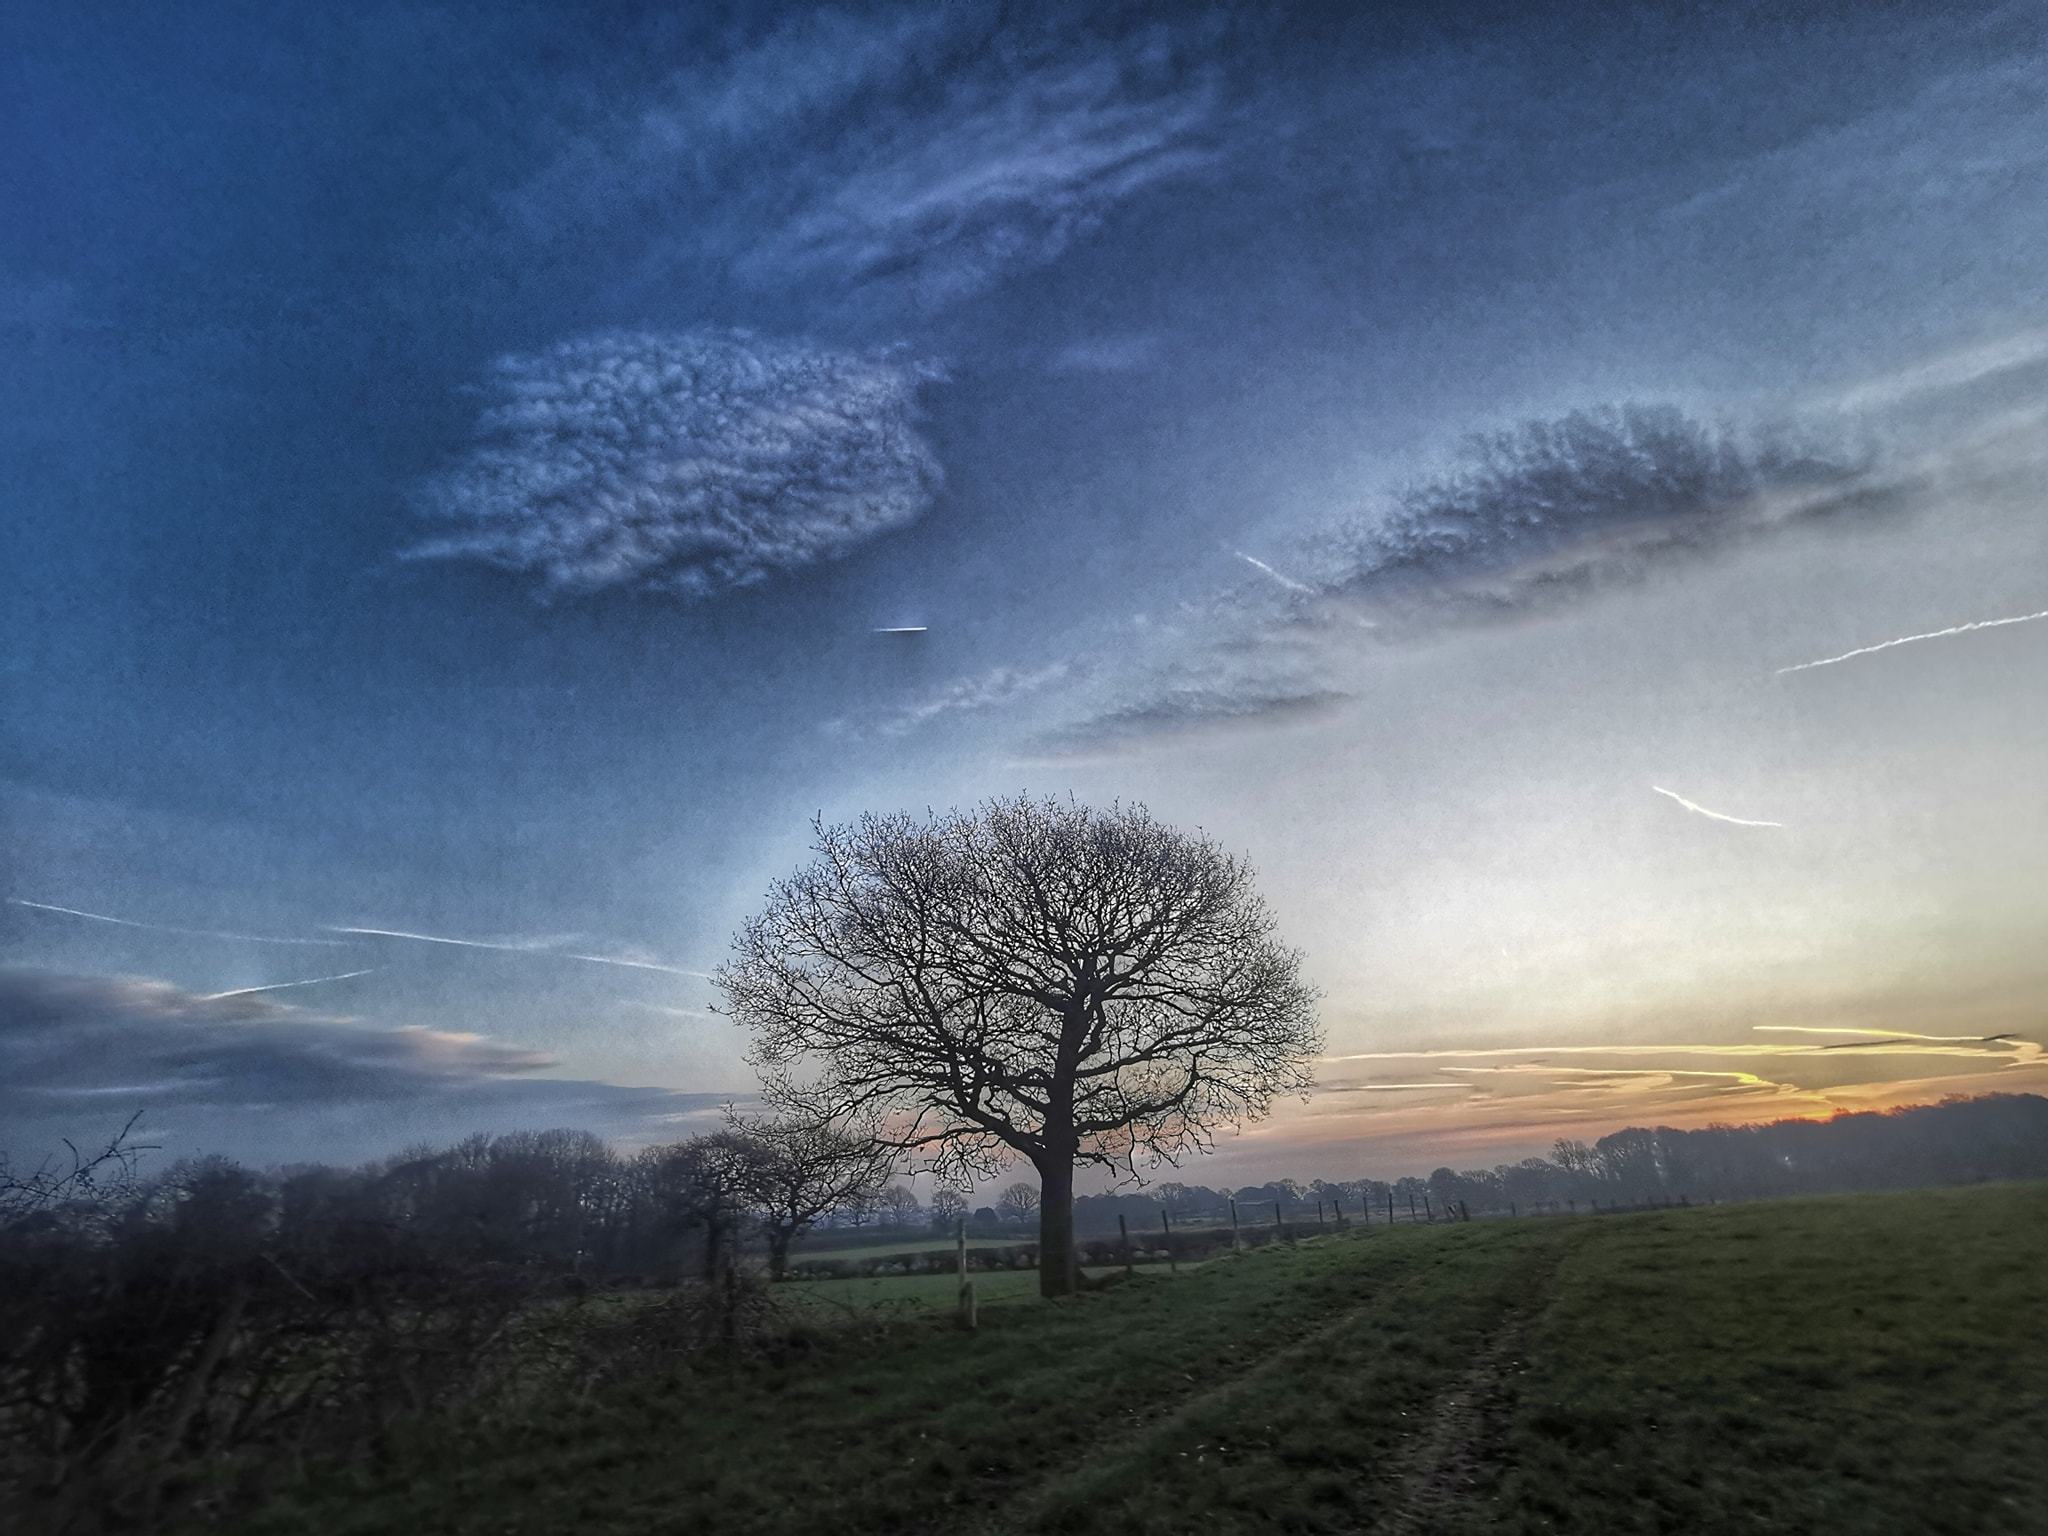 Morning skies in Barnton by Patricia Dyson